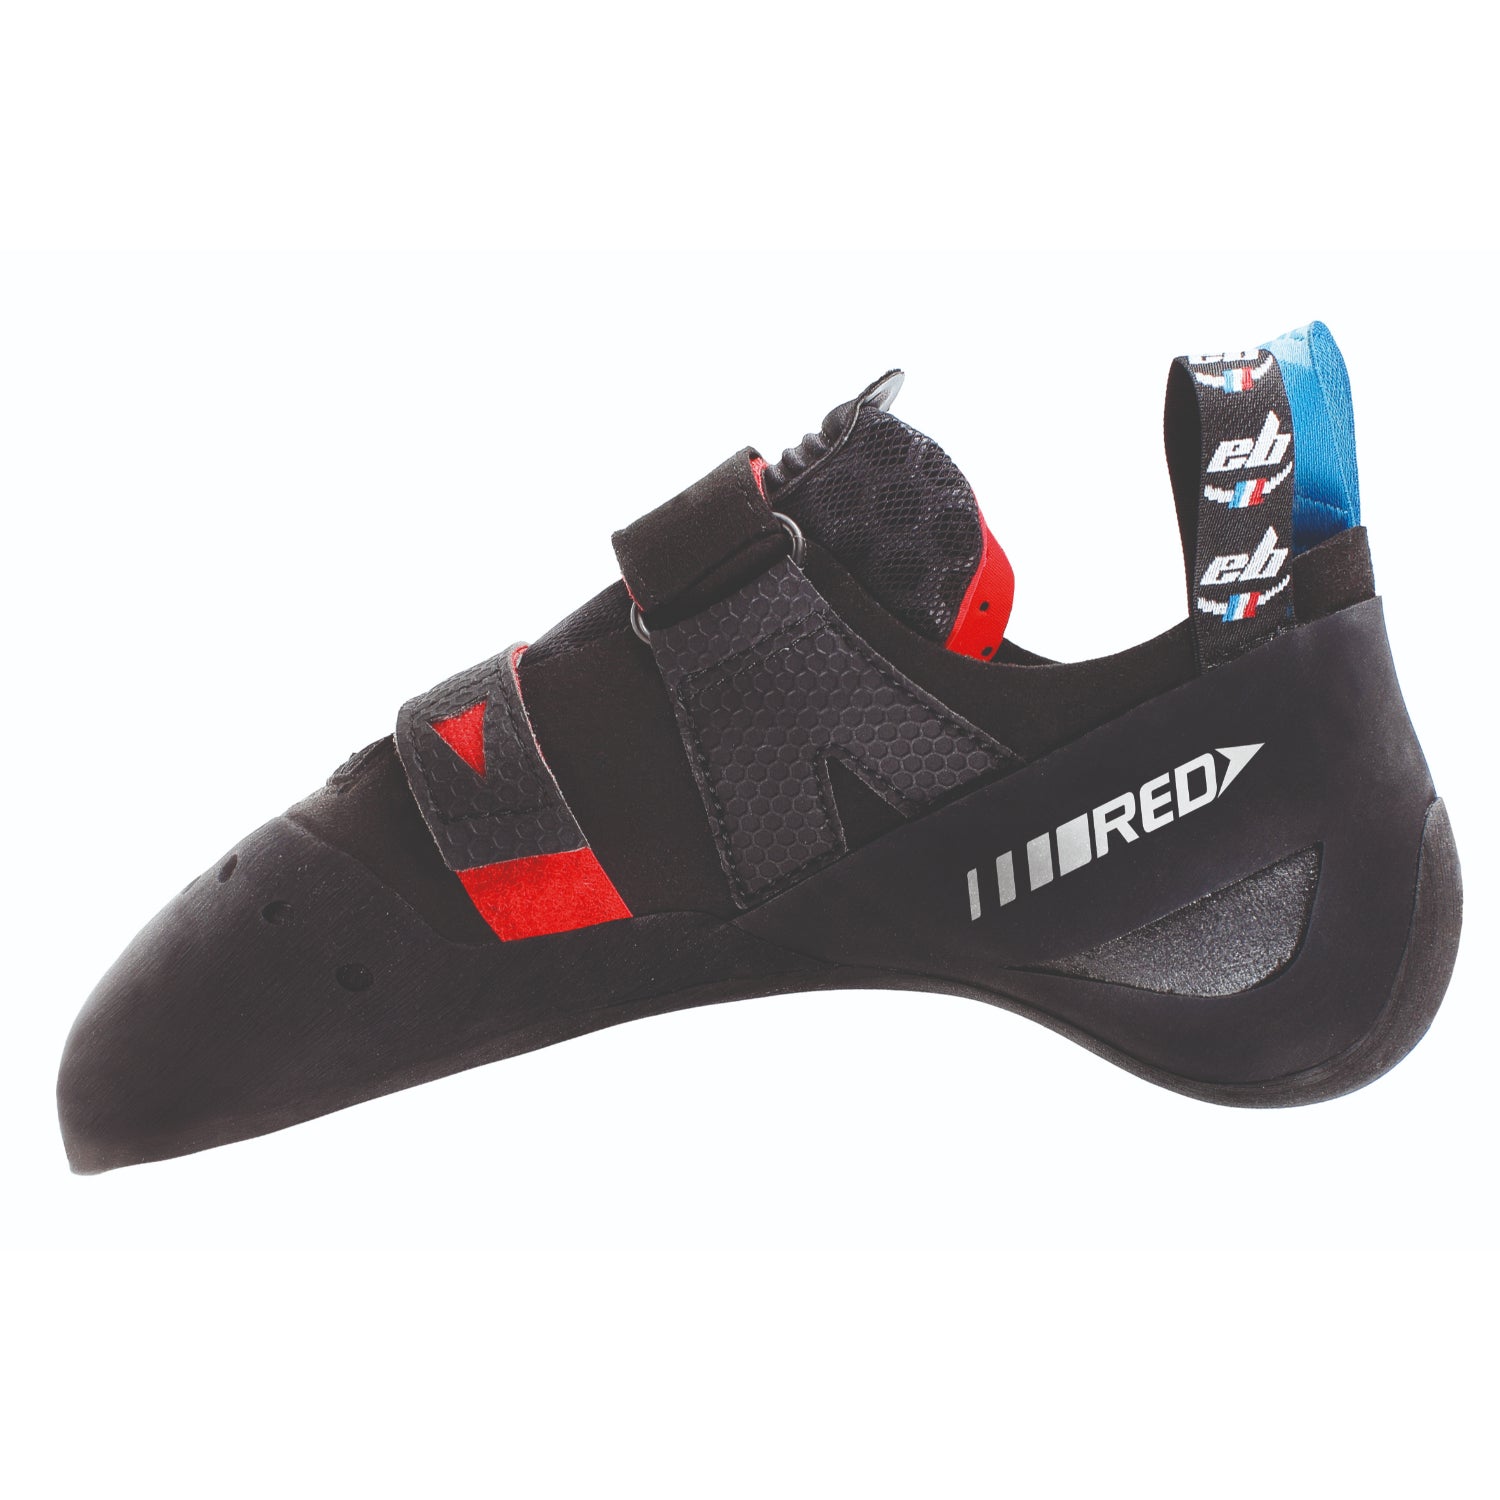 EB Red Climbing shoe from the side showing log and straps